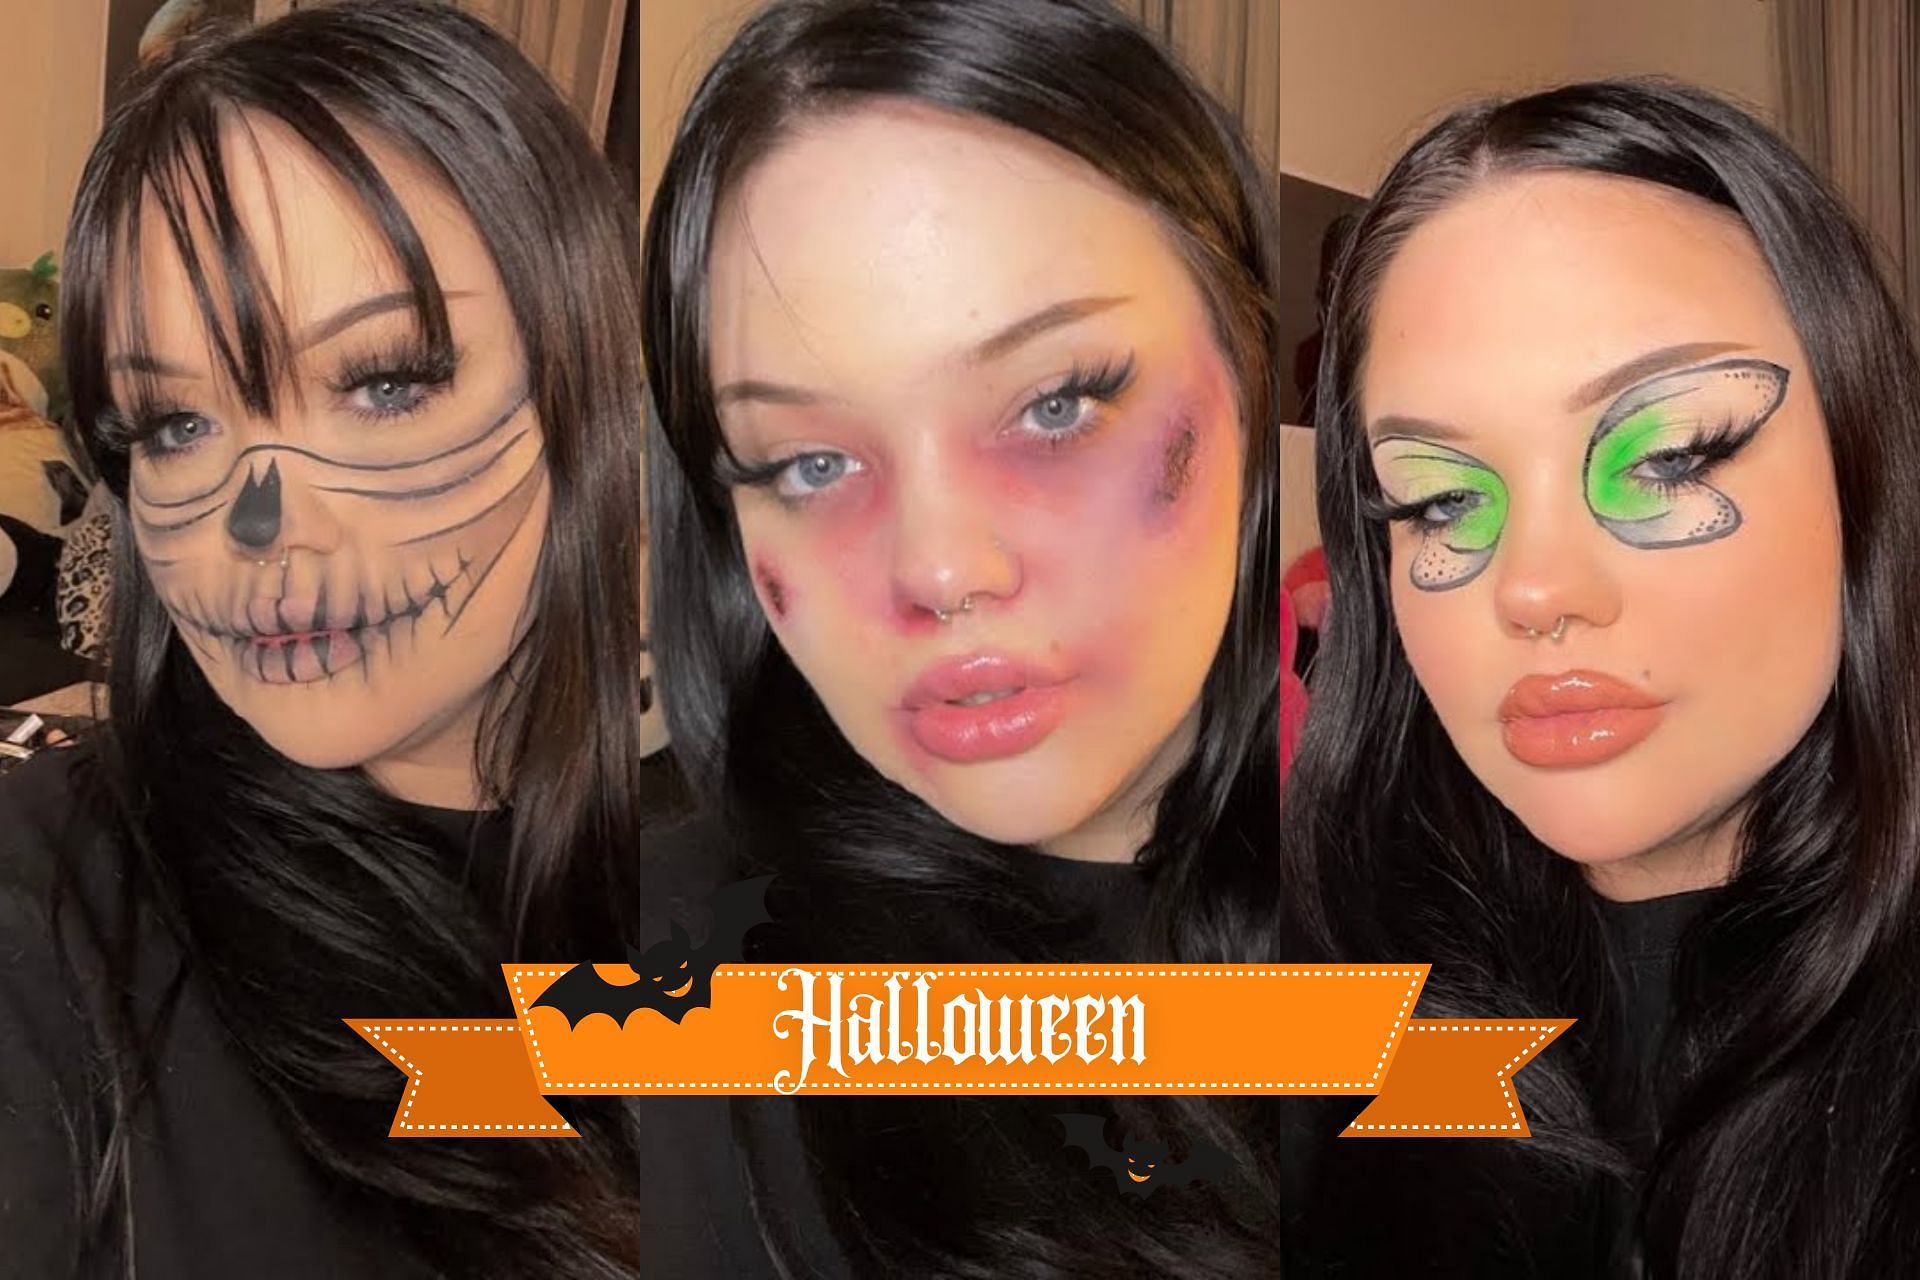 Halloween makeup ideas 2022: 5 clever hacks using household items only (image via karlie / Youtube)